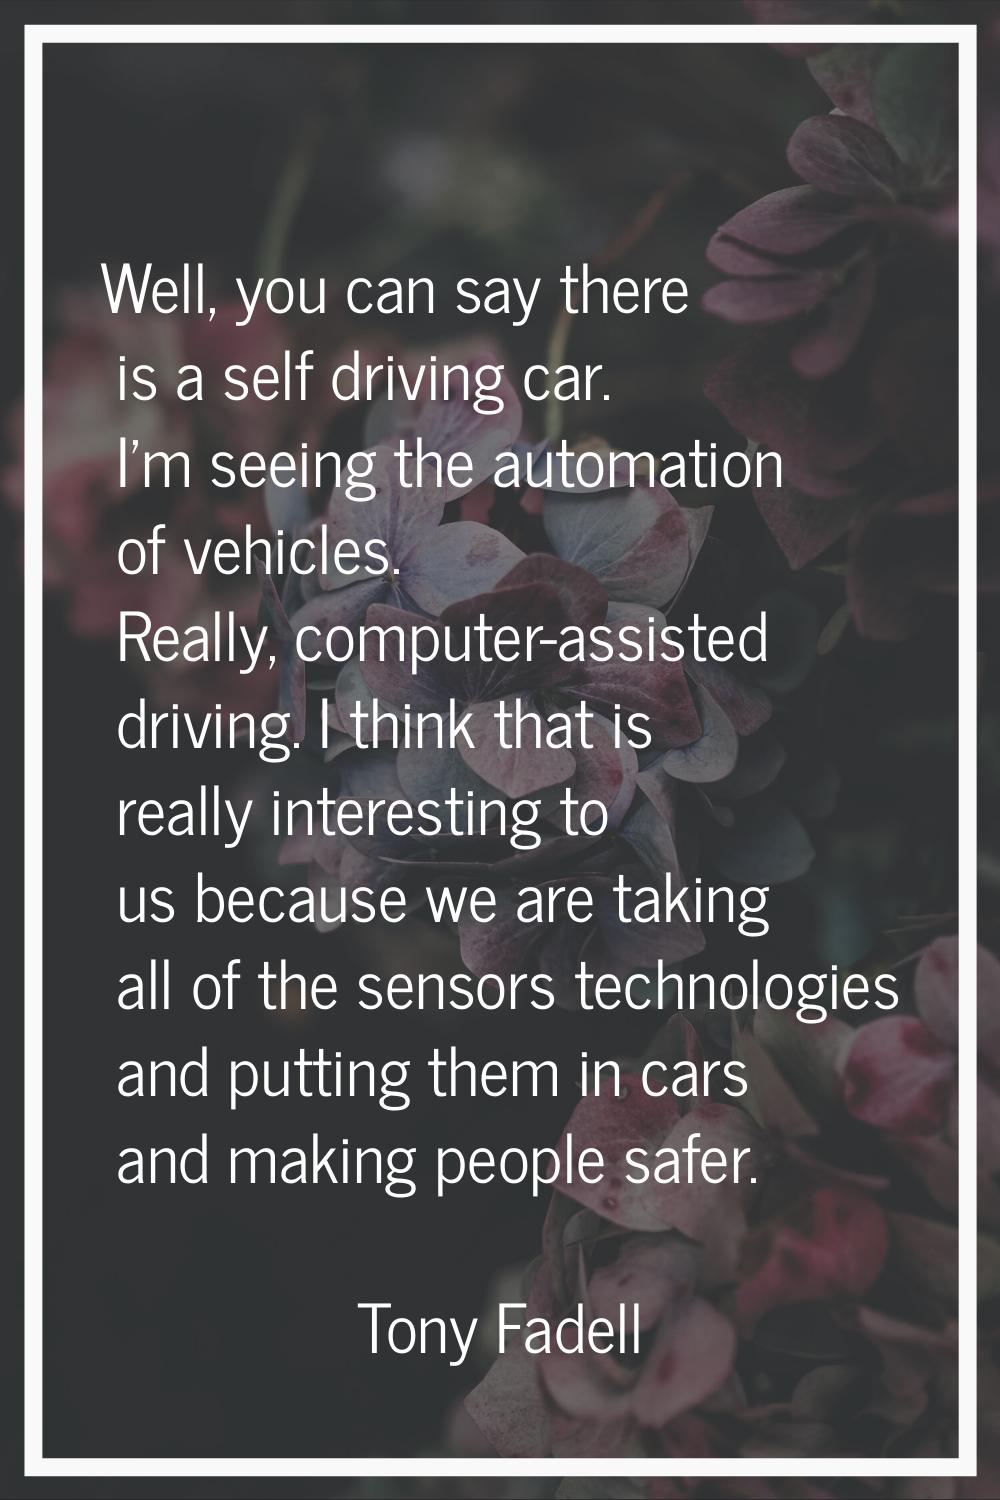 Well, you can say there is a self driving car. I'm seeing the automation of vehicles. Really, compu